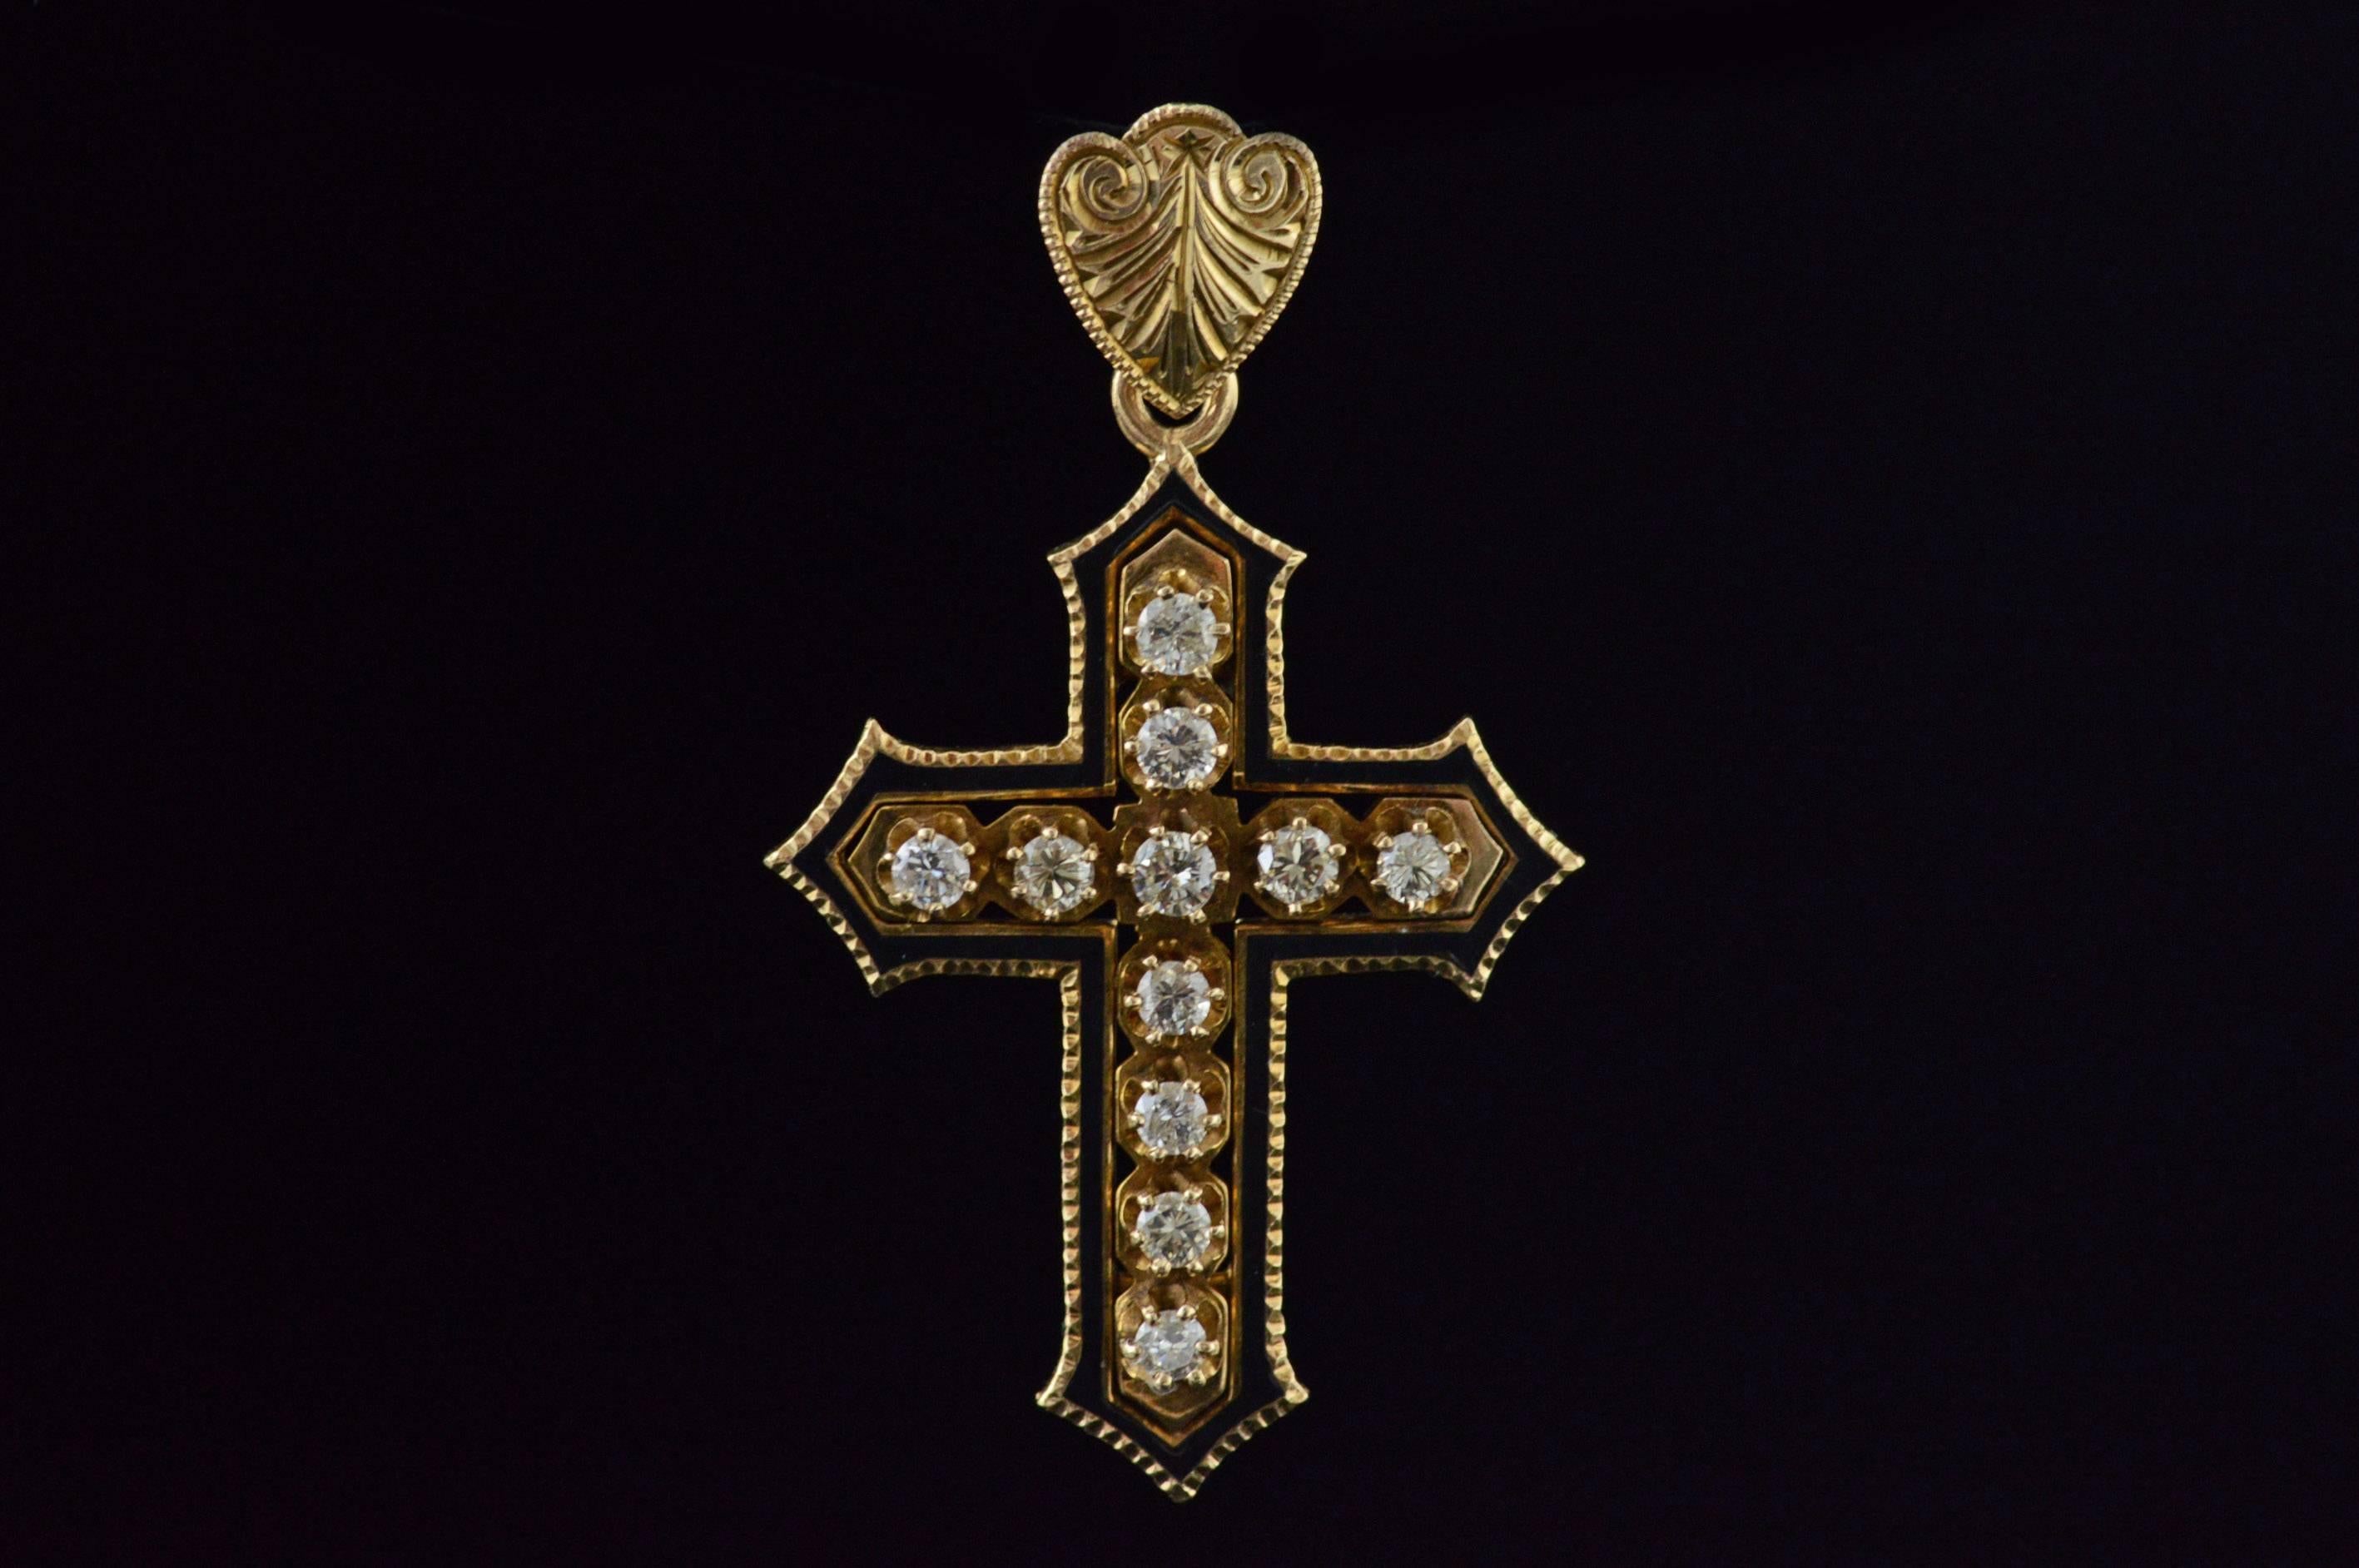 All diamonds are graded according to GIA grading standards.

·Item: 10K Victorian 0.55 CTW Diamond Mourning Jewelry Cross Pendant Yellow Gold

·Era: Victorian / 1890s

·Composition: 10k Gold Marked / Tested

·Gem Stone: 11x Diamonds= 0.55ctw